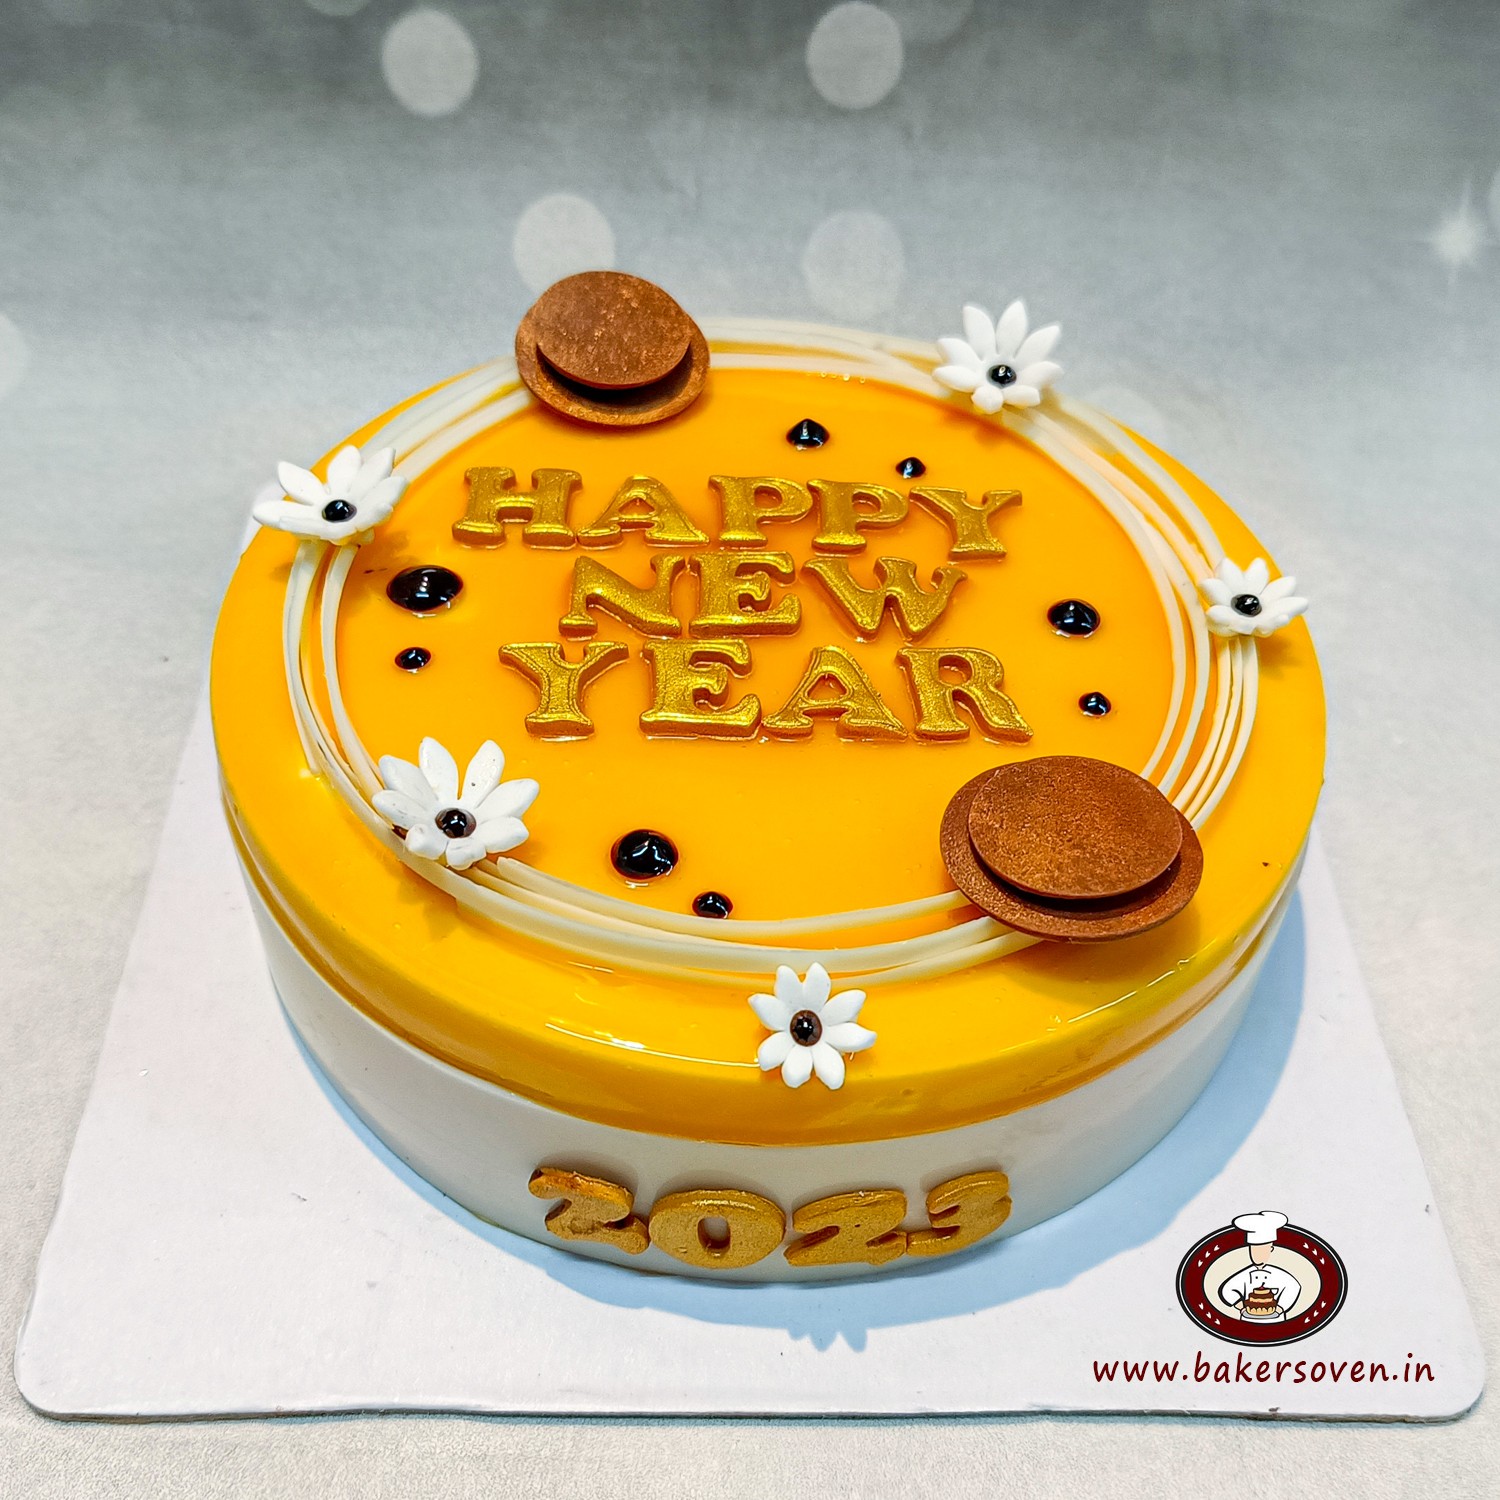 Butterscotch Cake For New Year | New Year 2022 Butterscotch Cake